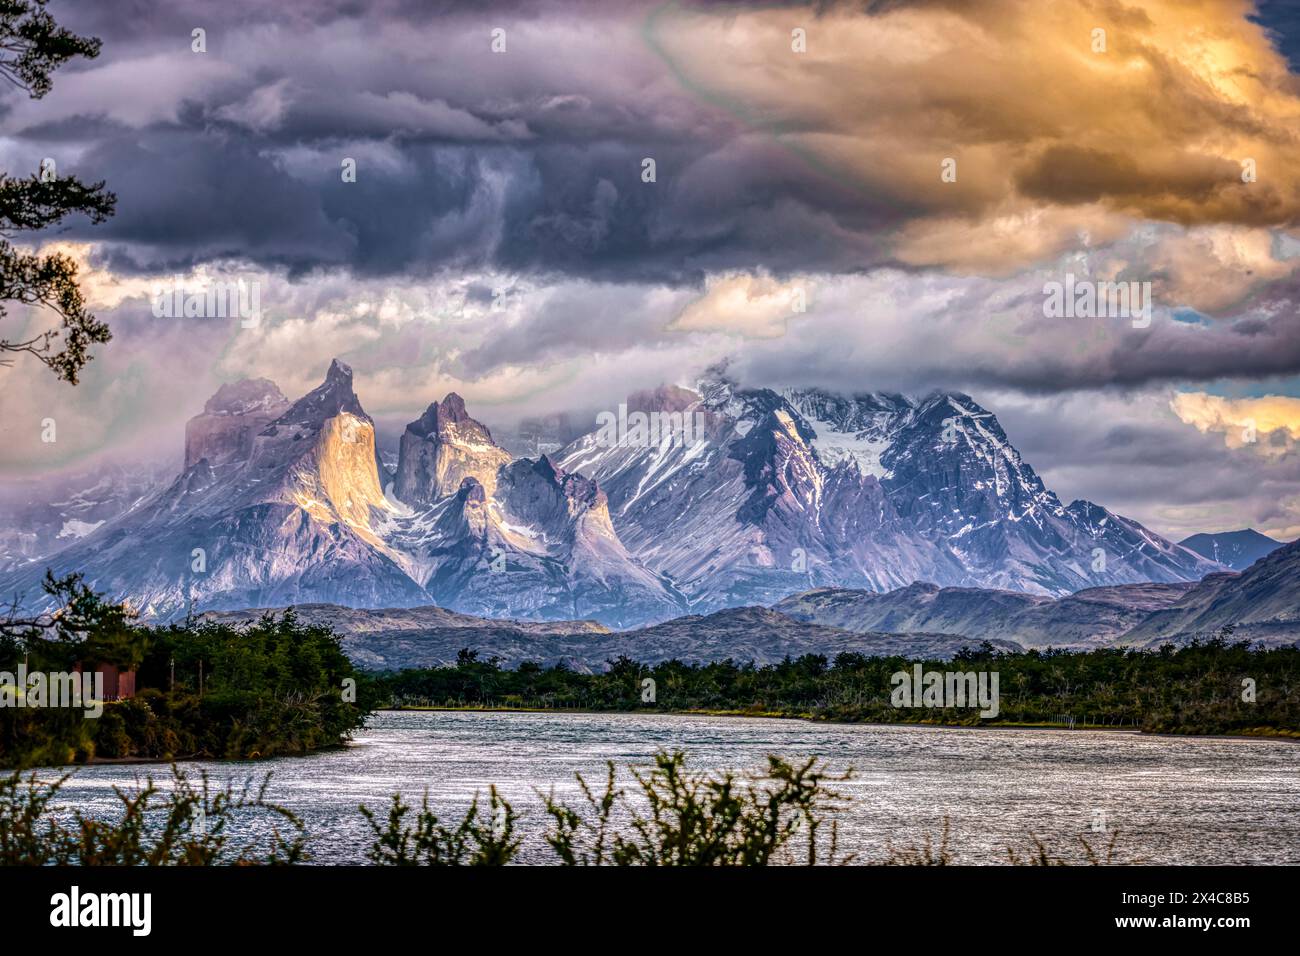 Chile, Torres del Paine National Park. Landscape with Serrano River and Cuernos del Paine mountains. Stock Photo